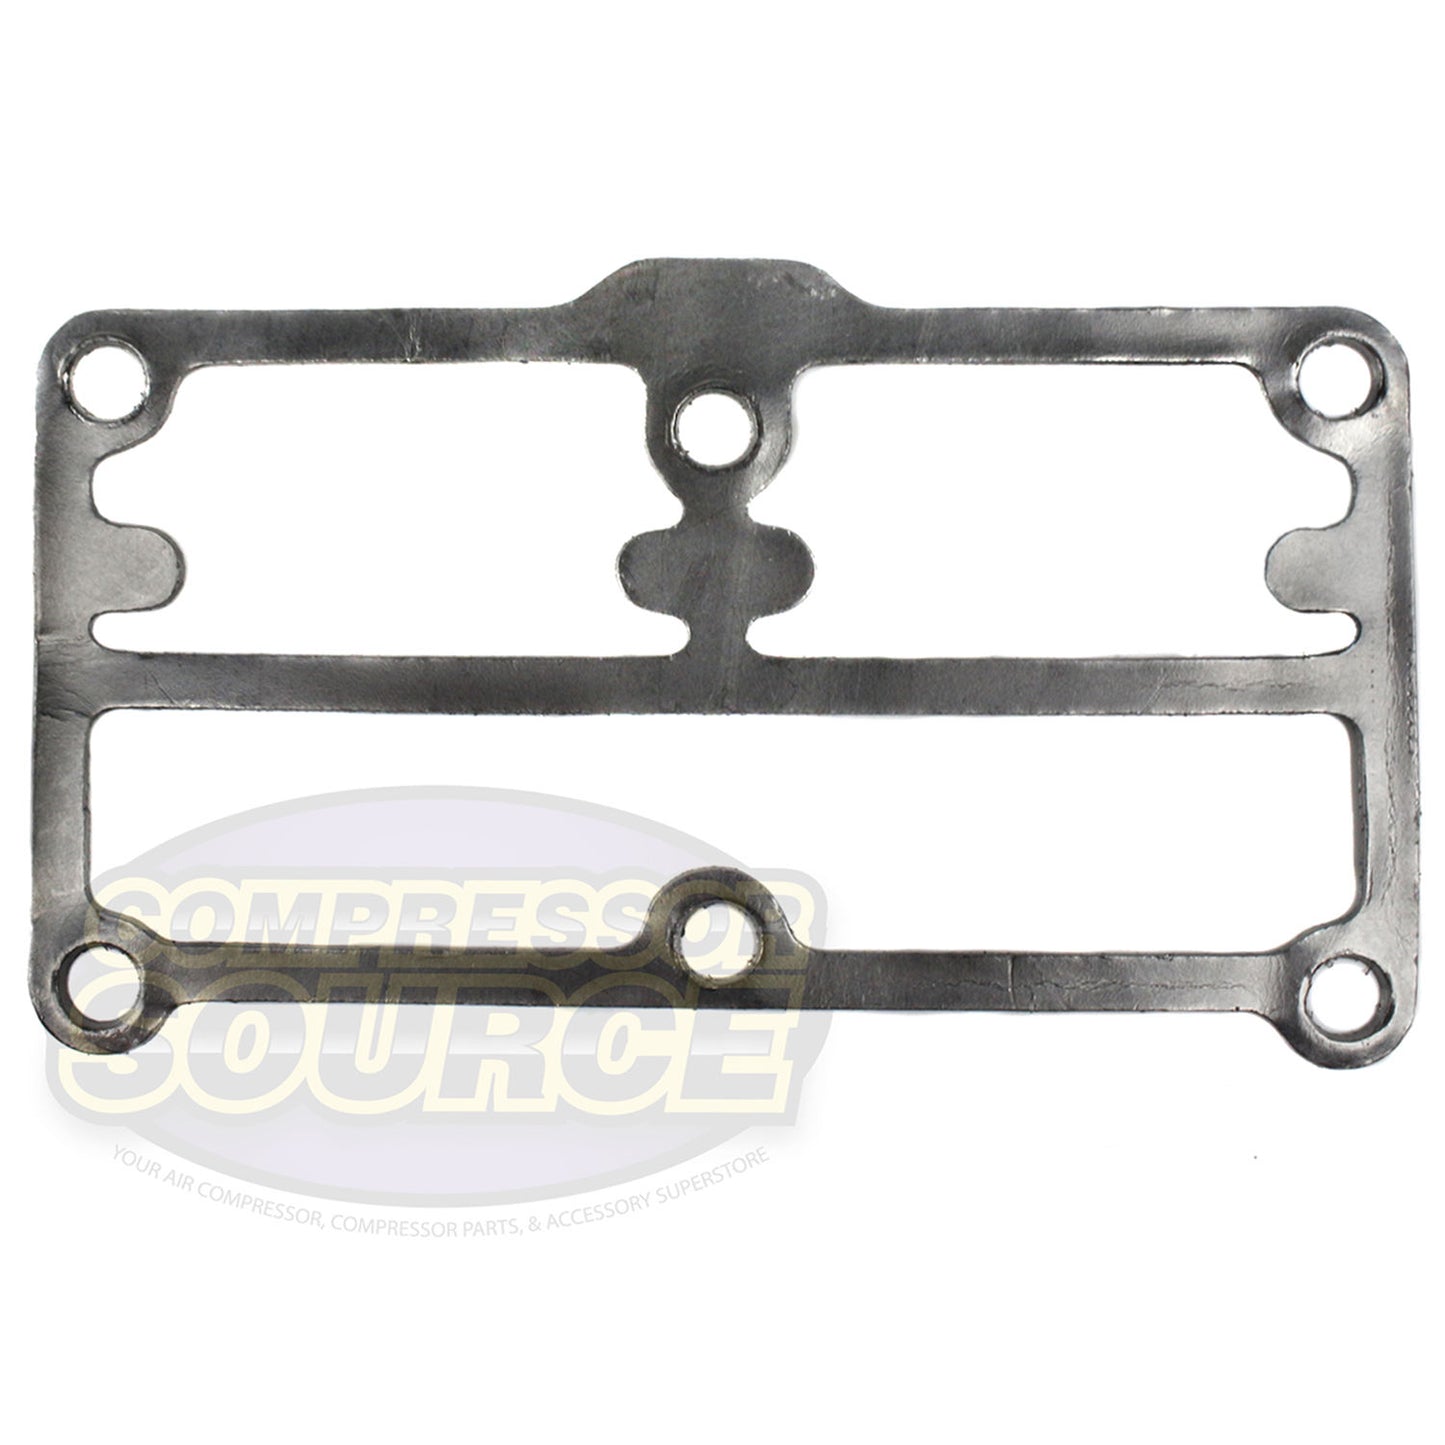 Head To Valve Plate Gasket Quincy OEM Part 114201-001 For Model QTS3 QTS5 Pumps